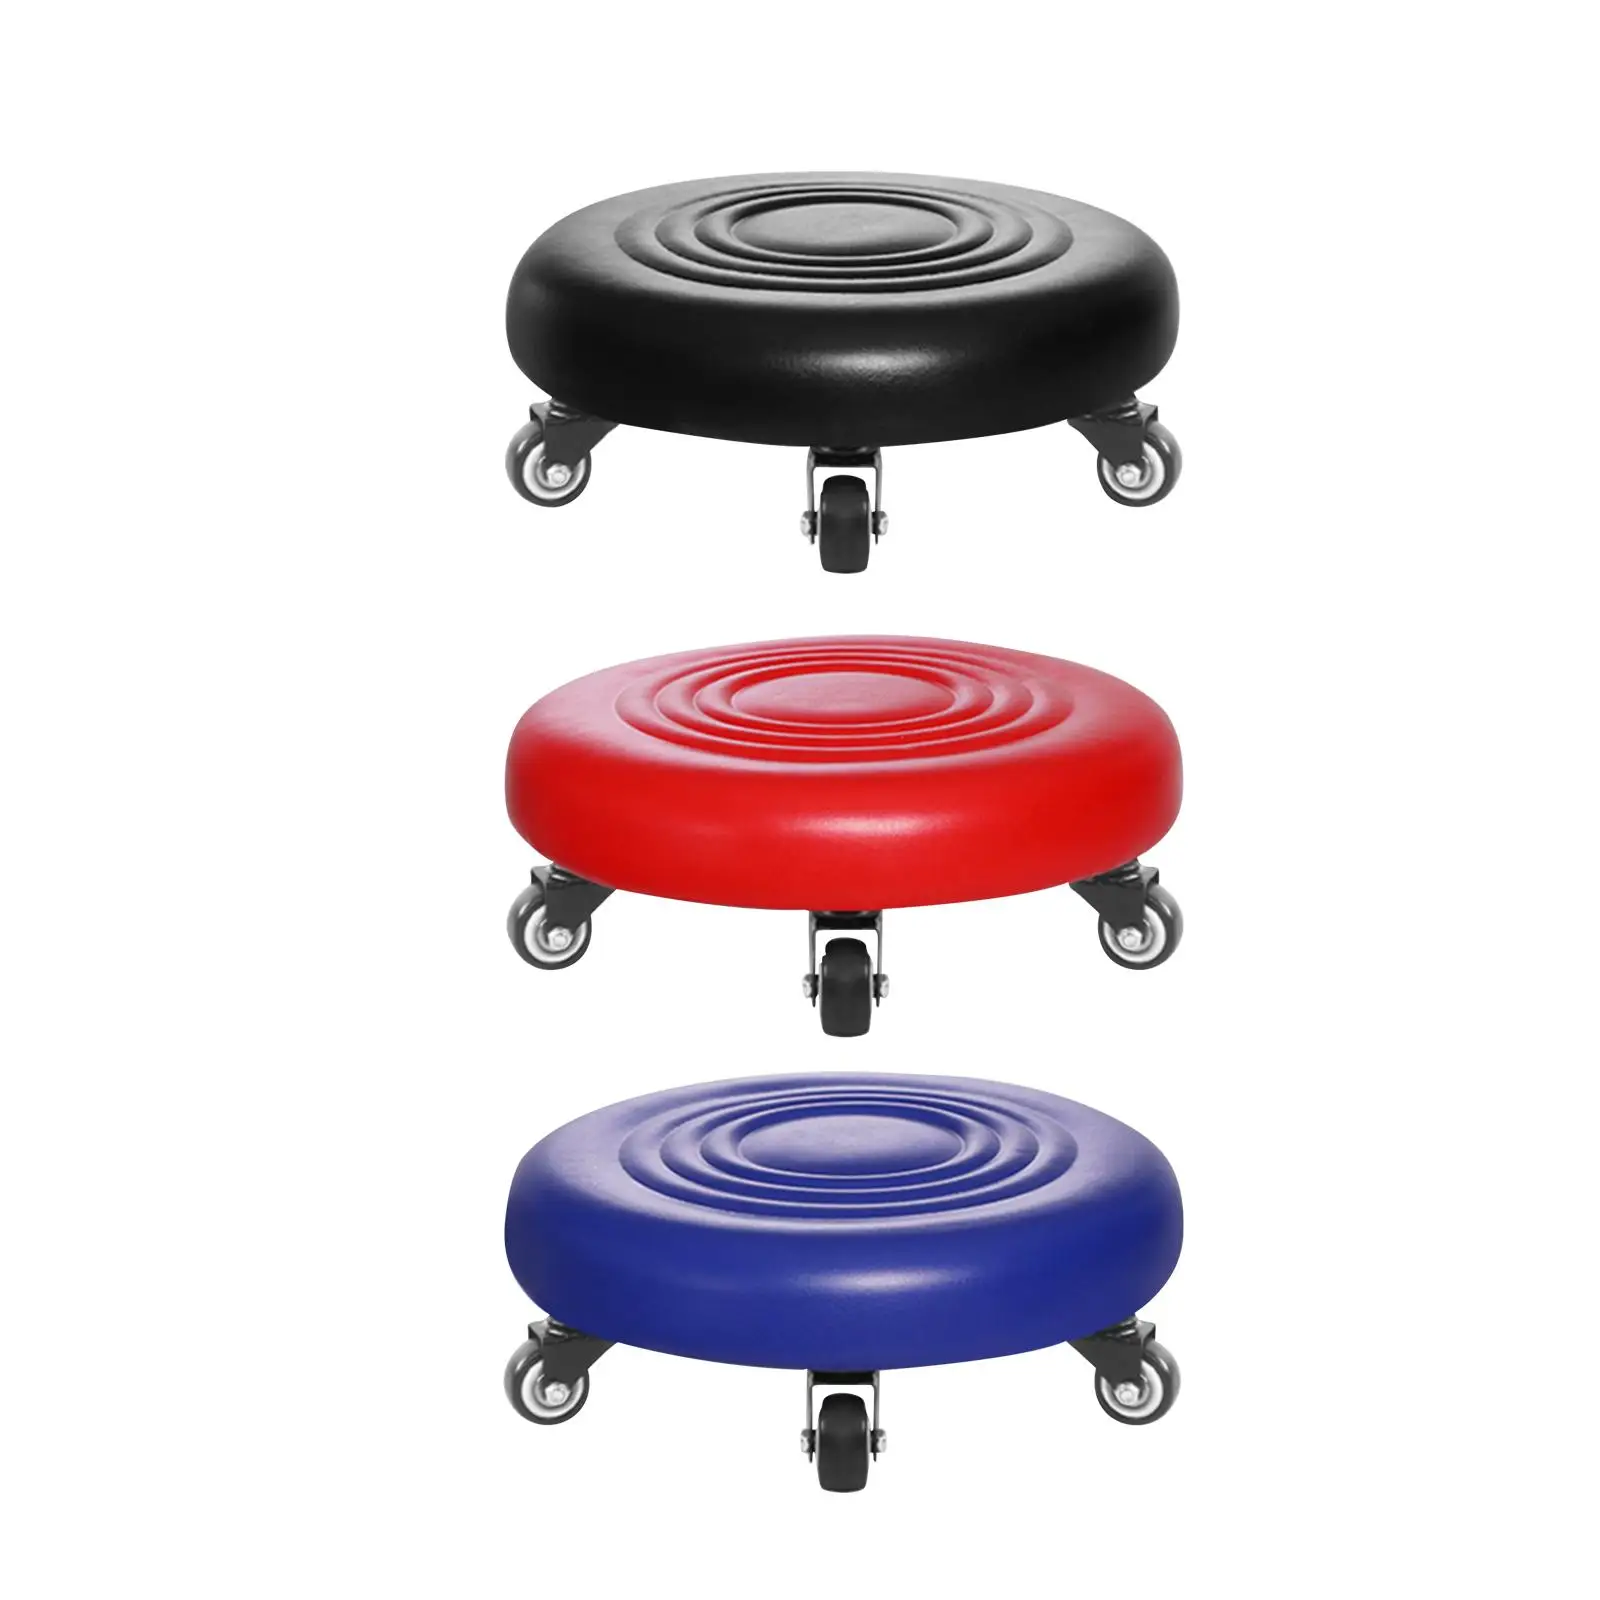 Pulley Stool Low Rolling Stool Low Roller Seat Stool for Home Kitchen Office Sport